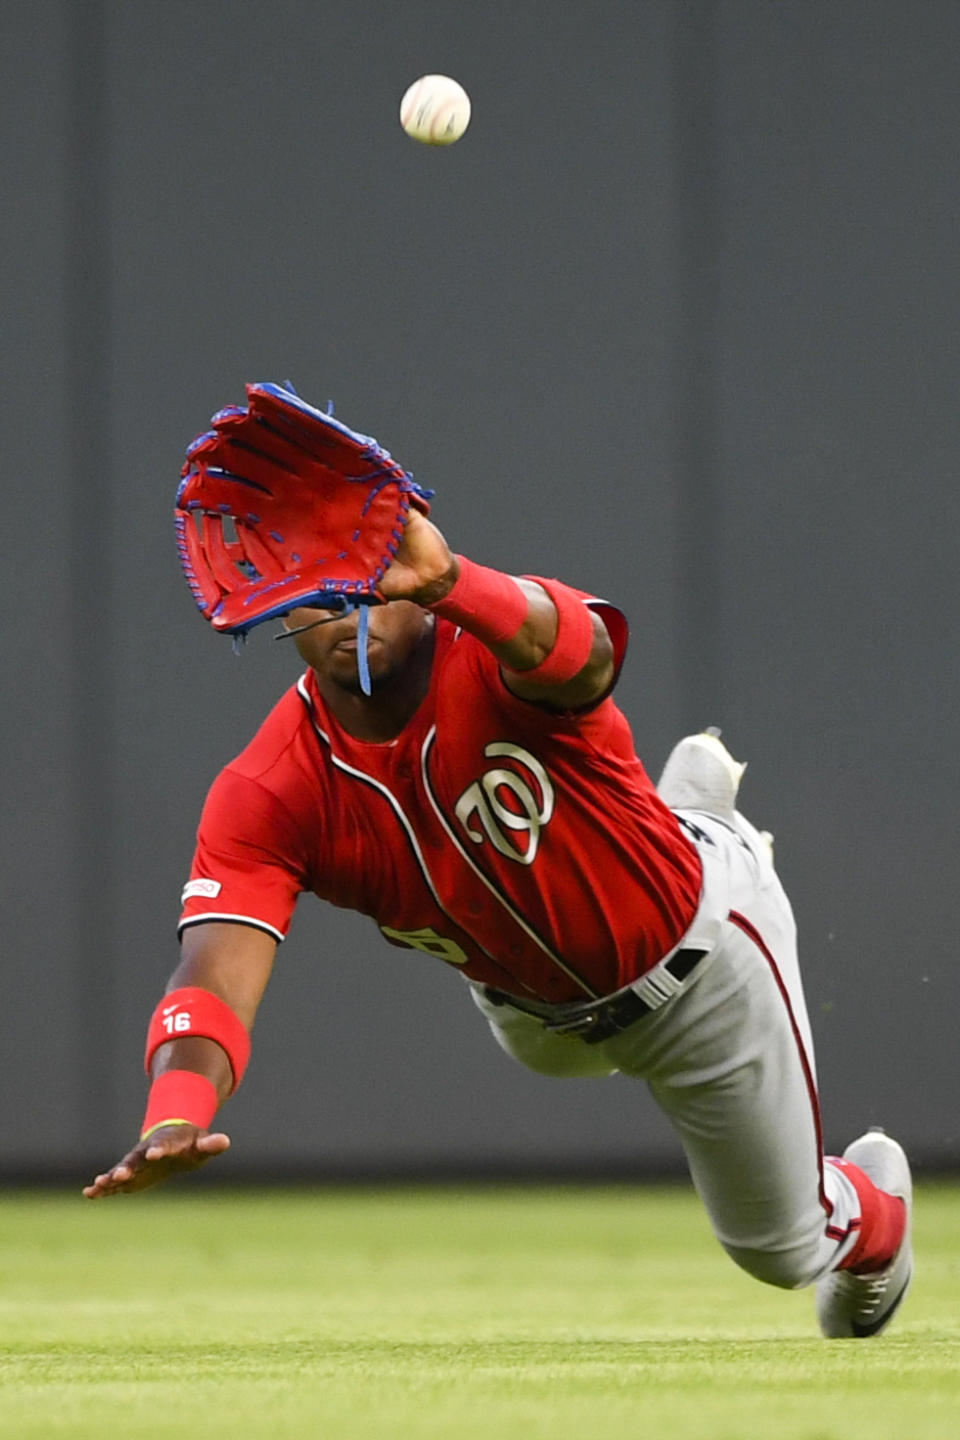 Washington Nationals center fielder Victor Robles makes a diving catch on a ball off the bat of Atlanta Braves' Dansby Swanson during the fifth inning of a baseball game Sunday, July 21, 2019, in Atlanta. (AP Photo/John Amis)